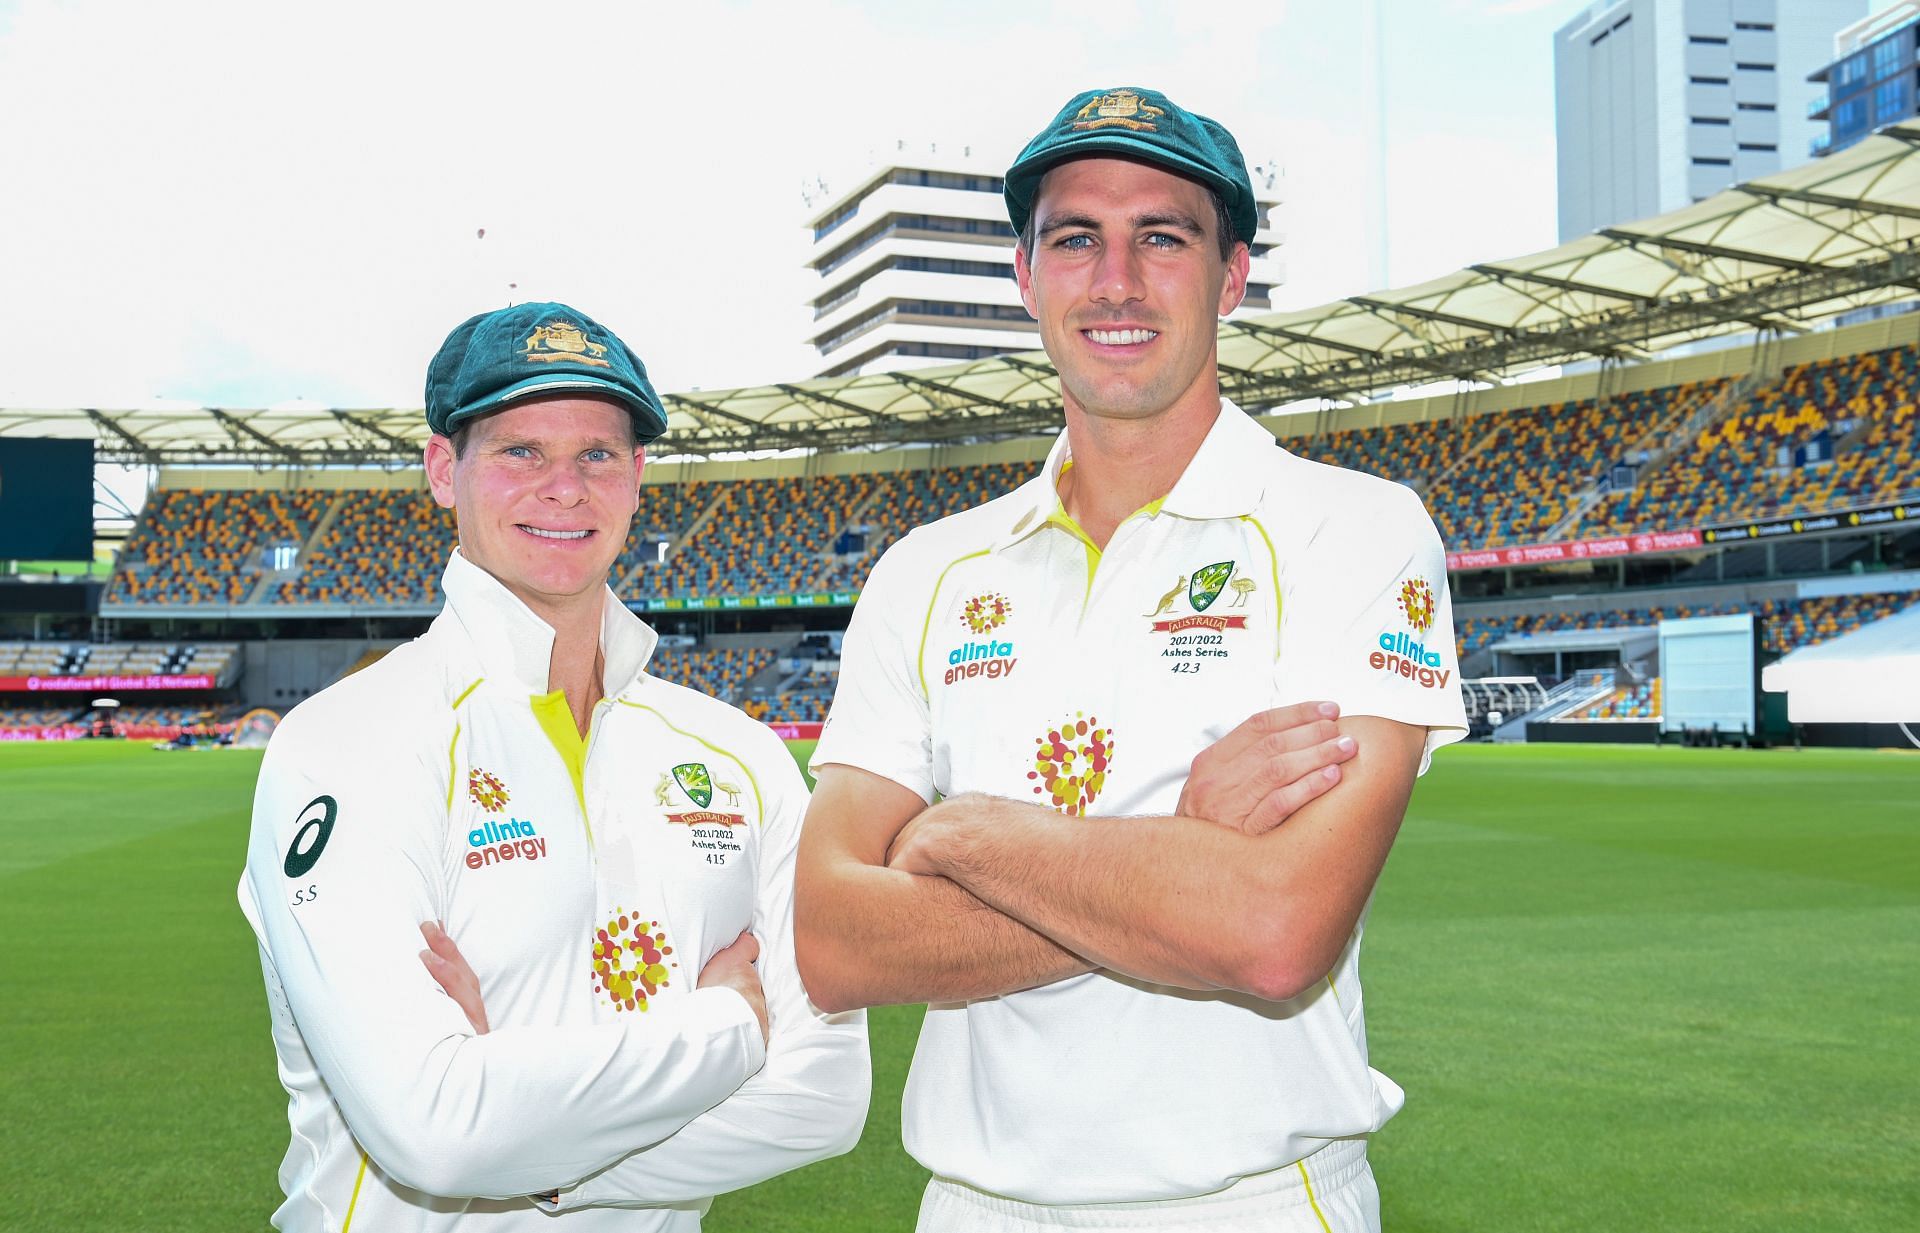 Steve Smith will captain Australia in the 2nd Ashes test in the absence of Pat Cummins.